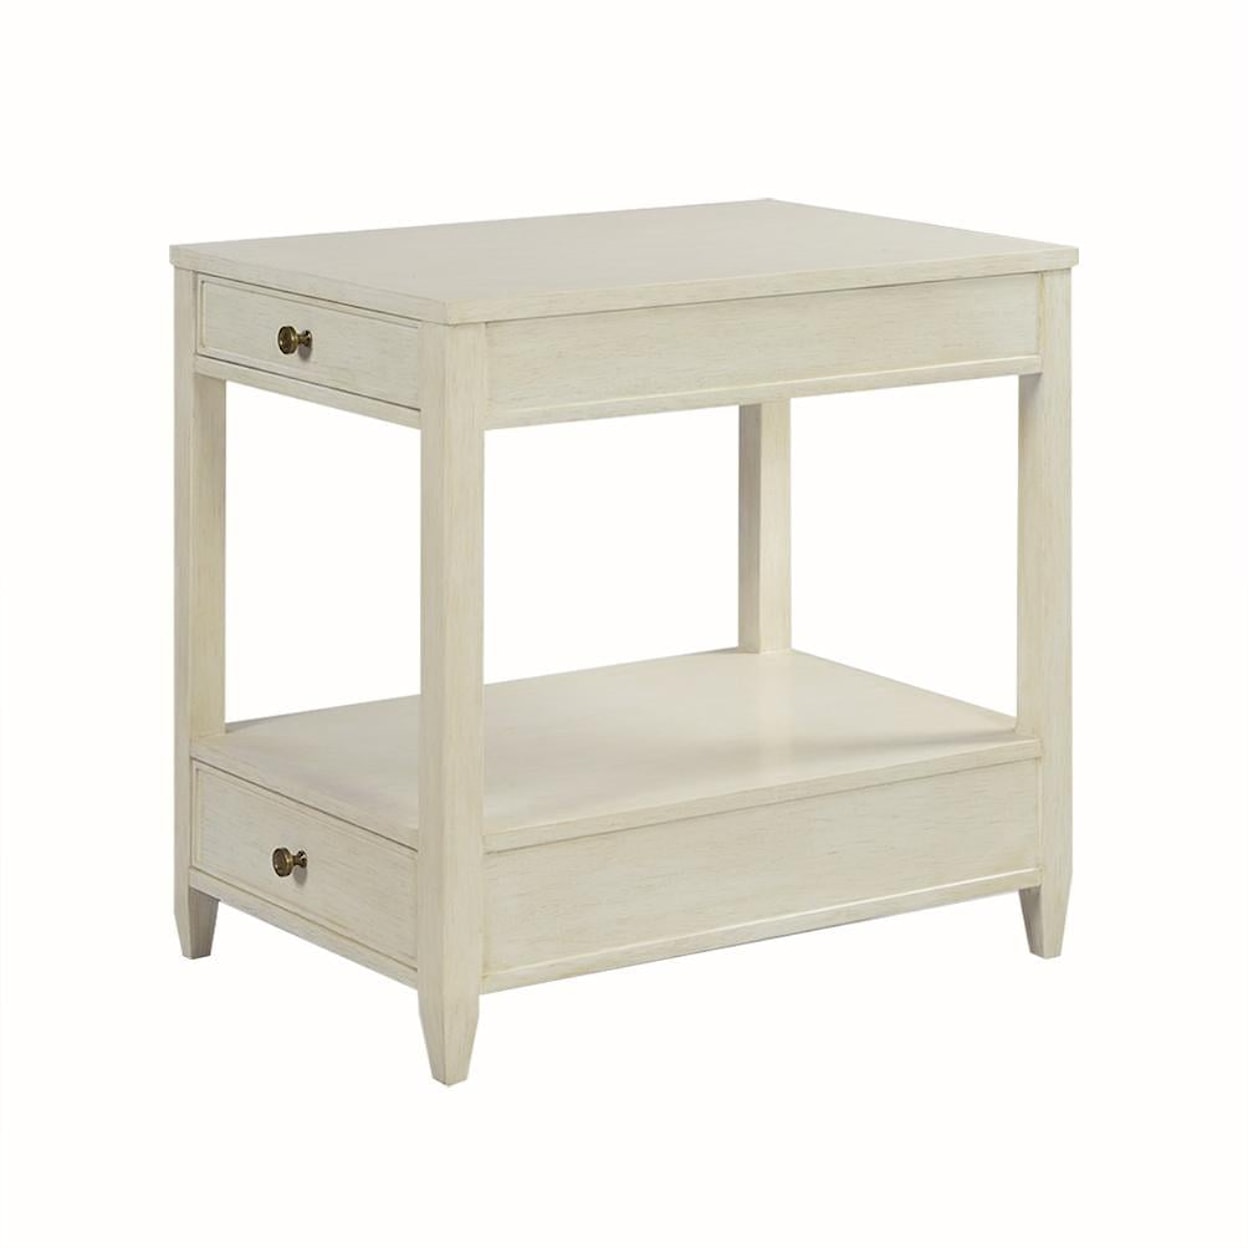 Oliver Home Furnishings End/ Side Tables NARROW, 2 DRAWER SIDE TABLE- DRIFT